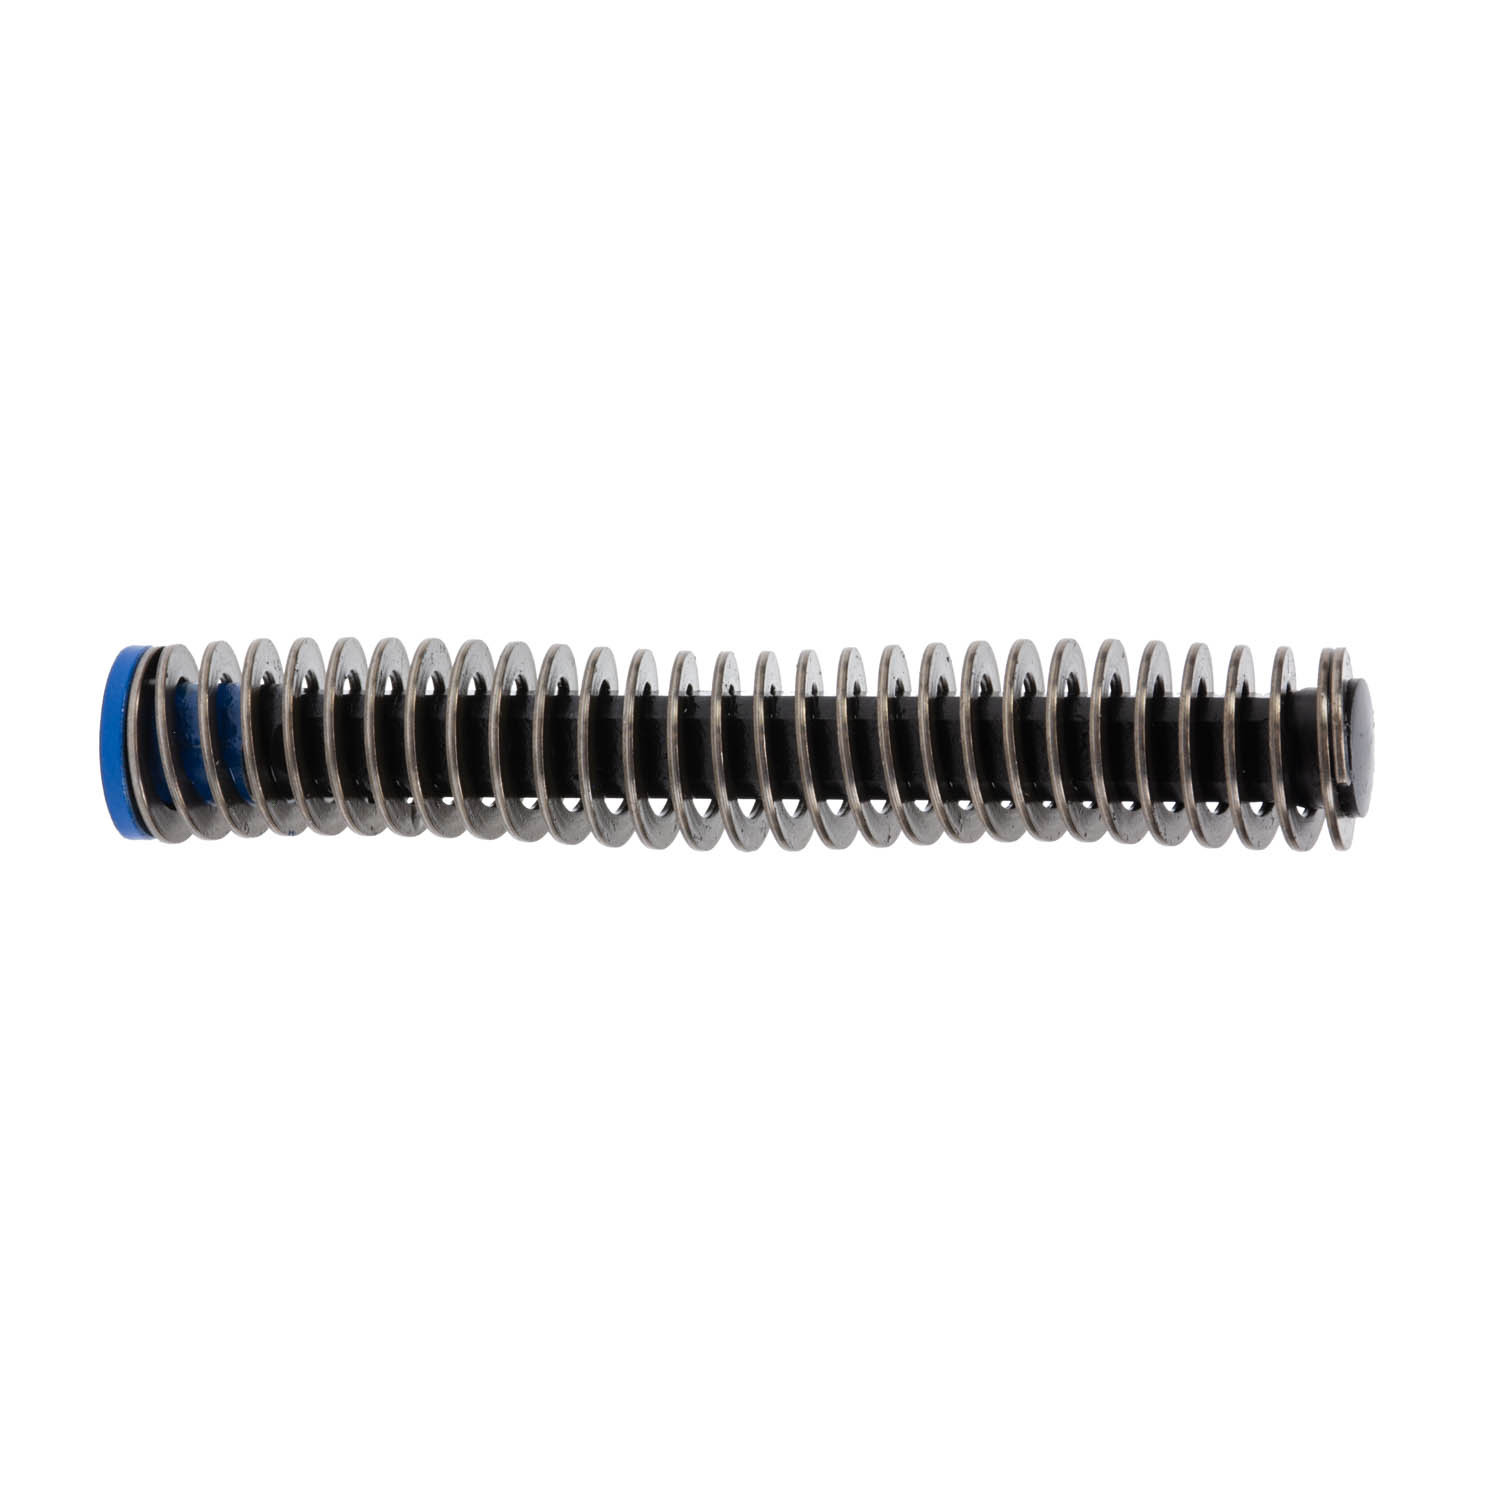 Canik Compact Recoil Spring/Guide Rod Assembly, Low Force: MGW